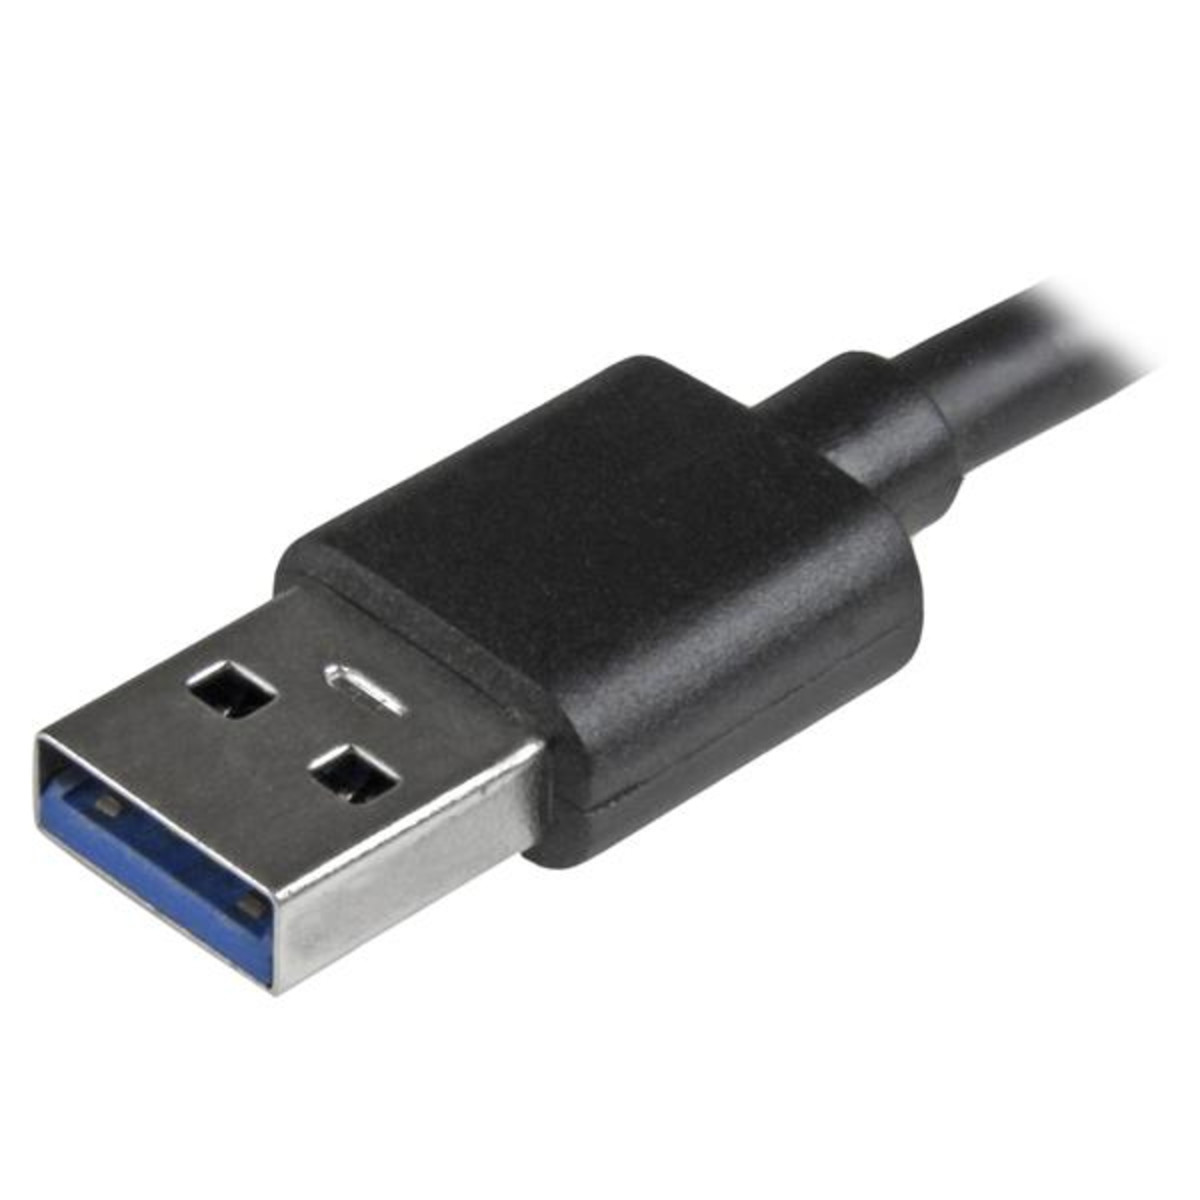 USB 3.1 Adapter Cable for 2.5 3.5 SATA